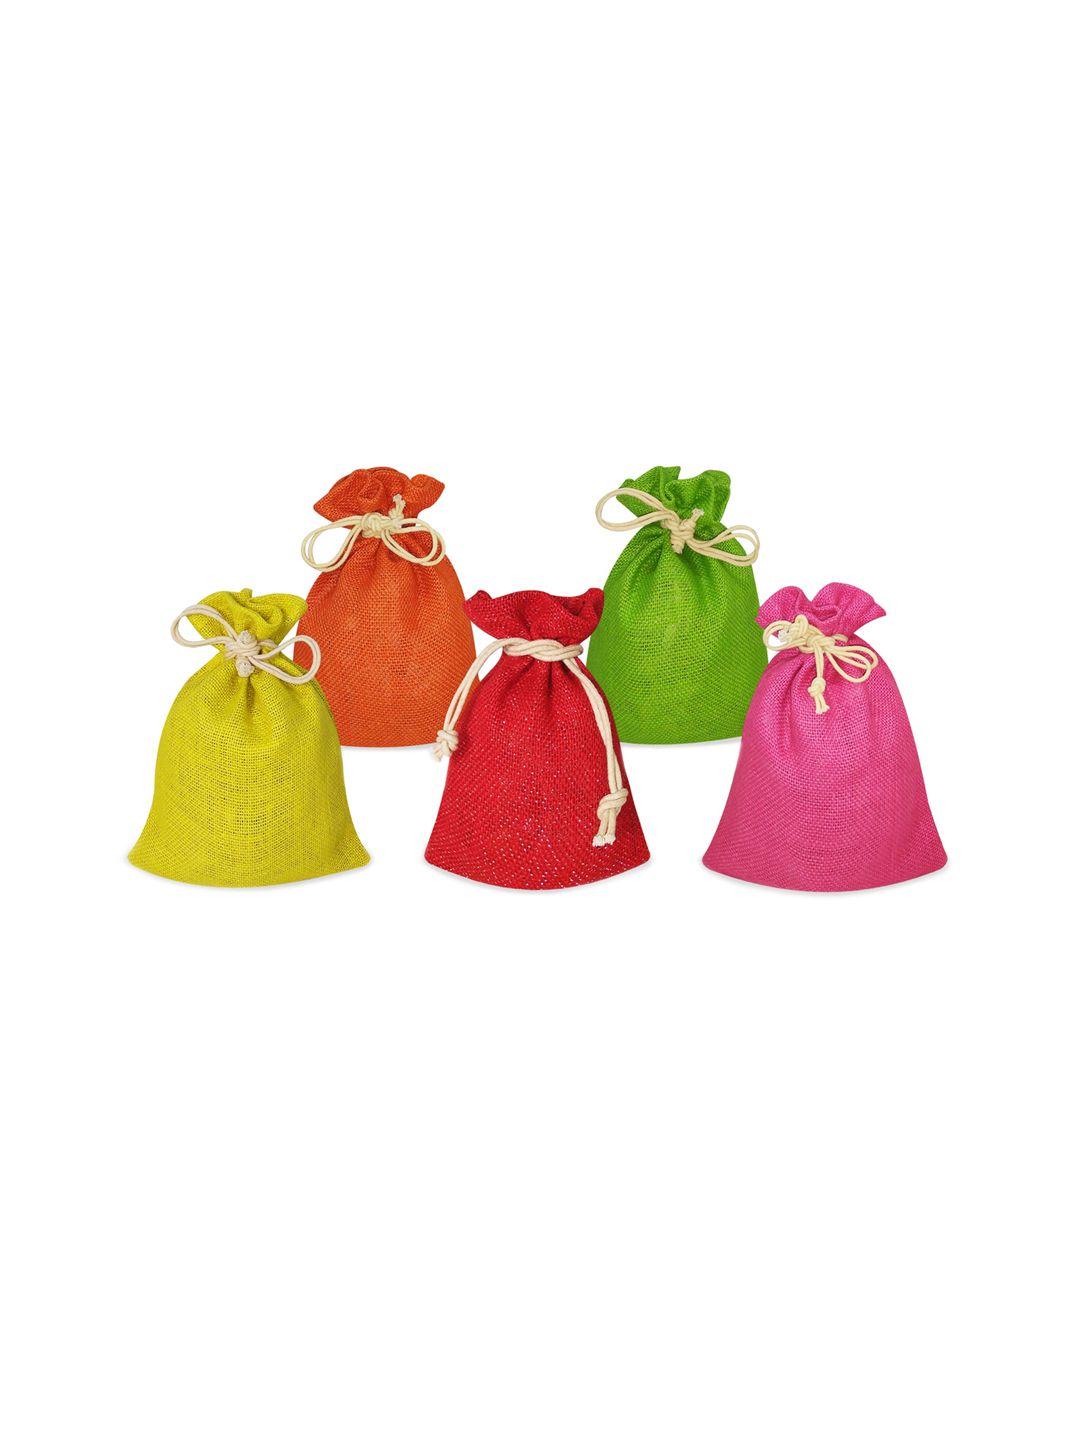 earthbags pack of 5 red & green potli clutch with drawstring